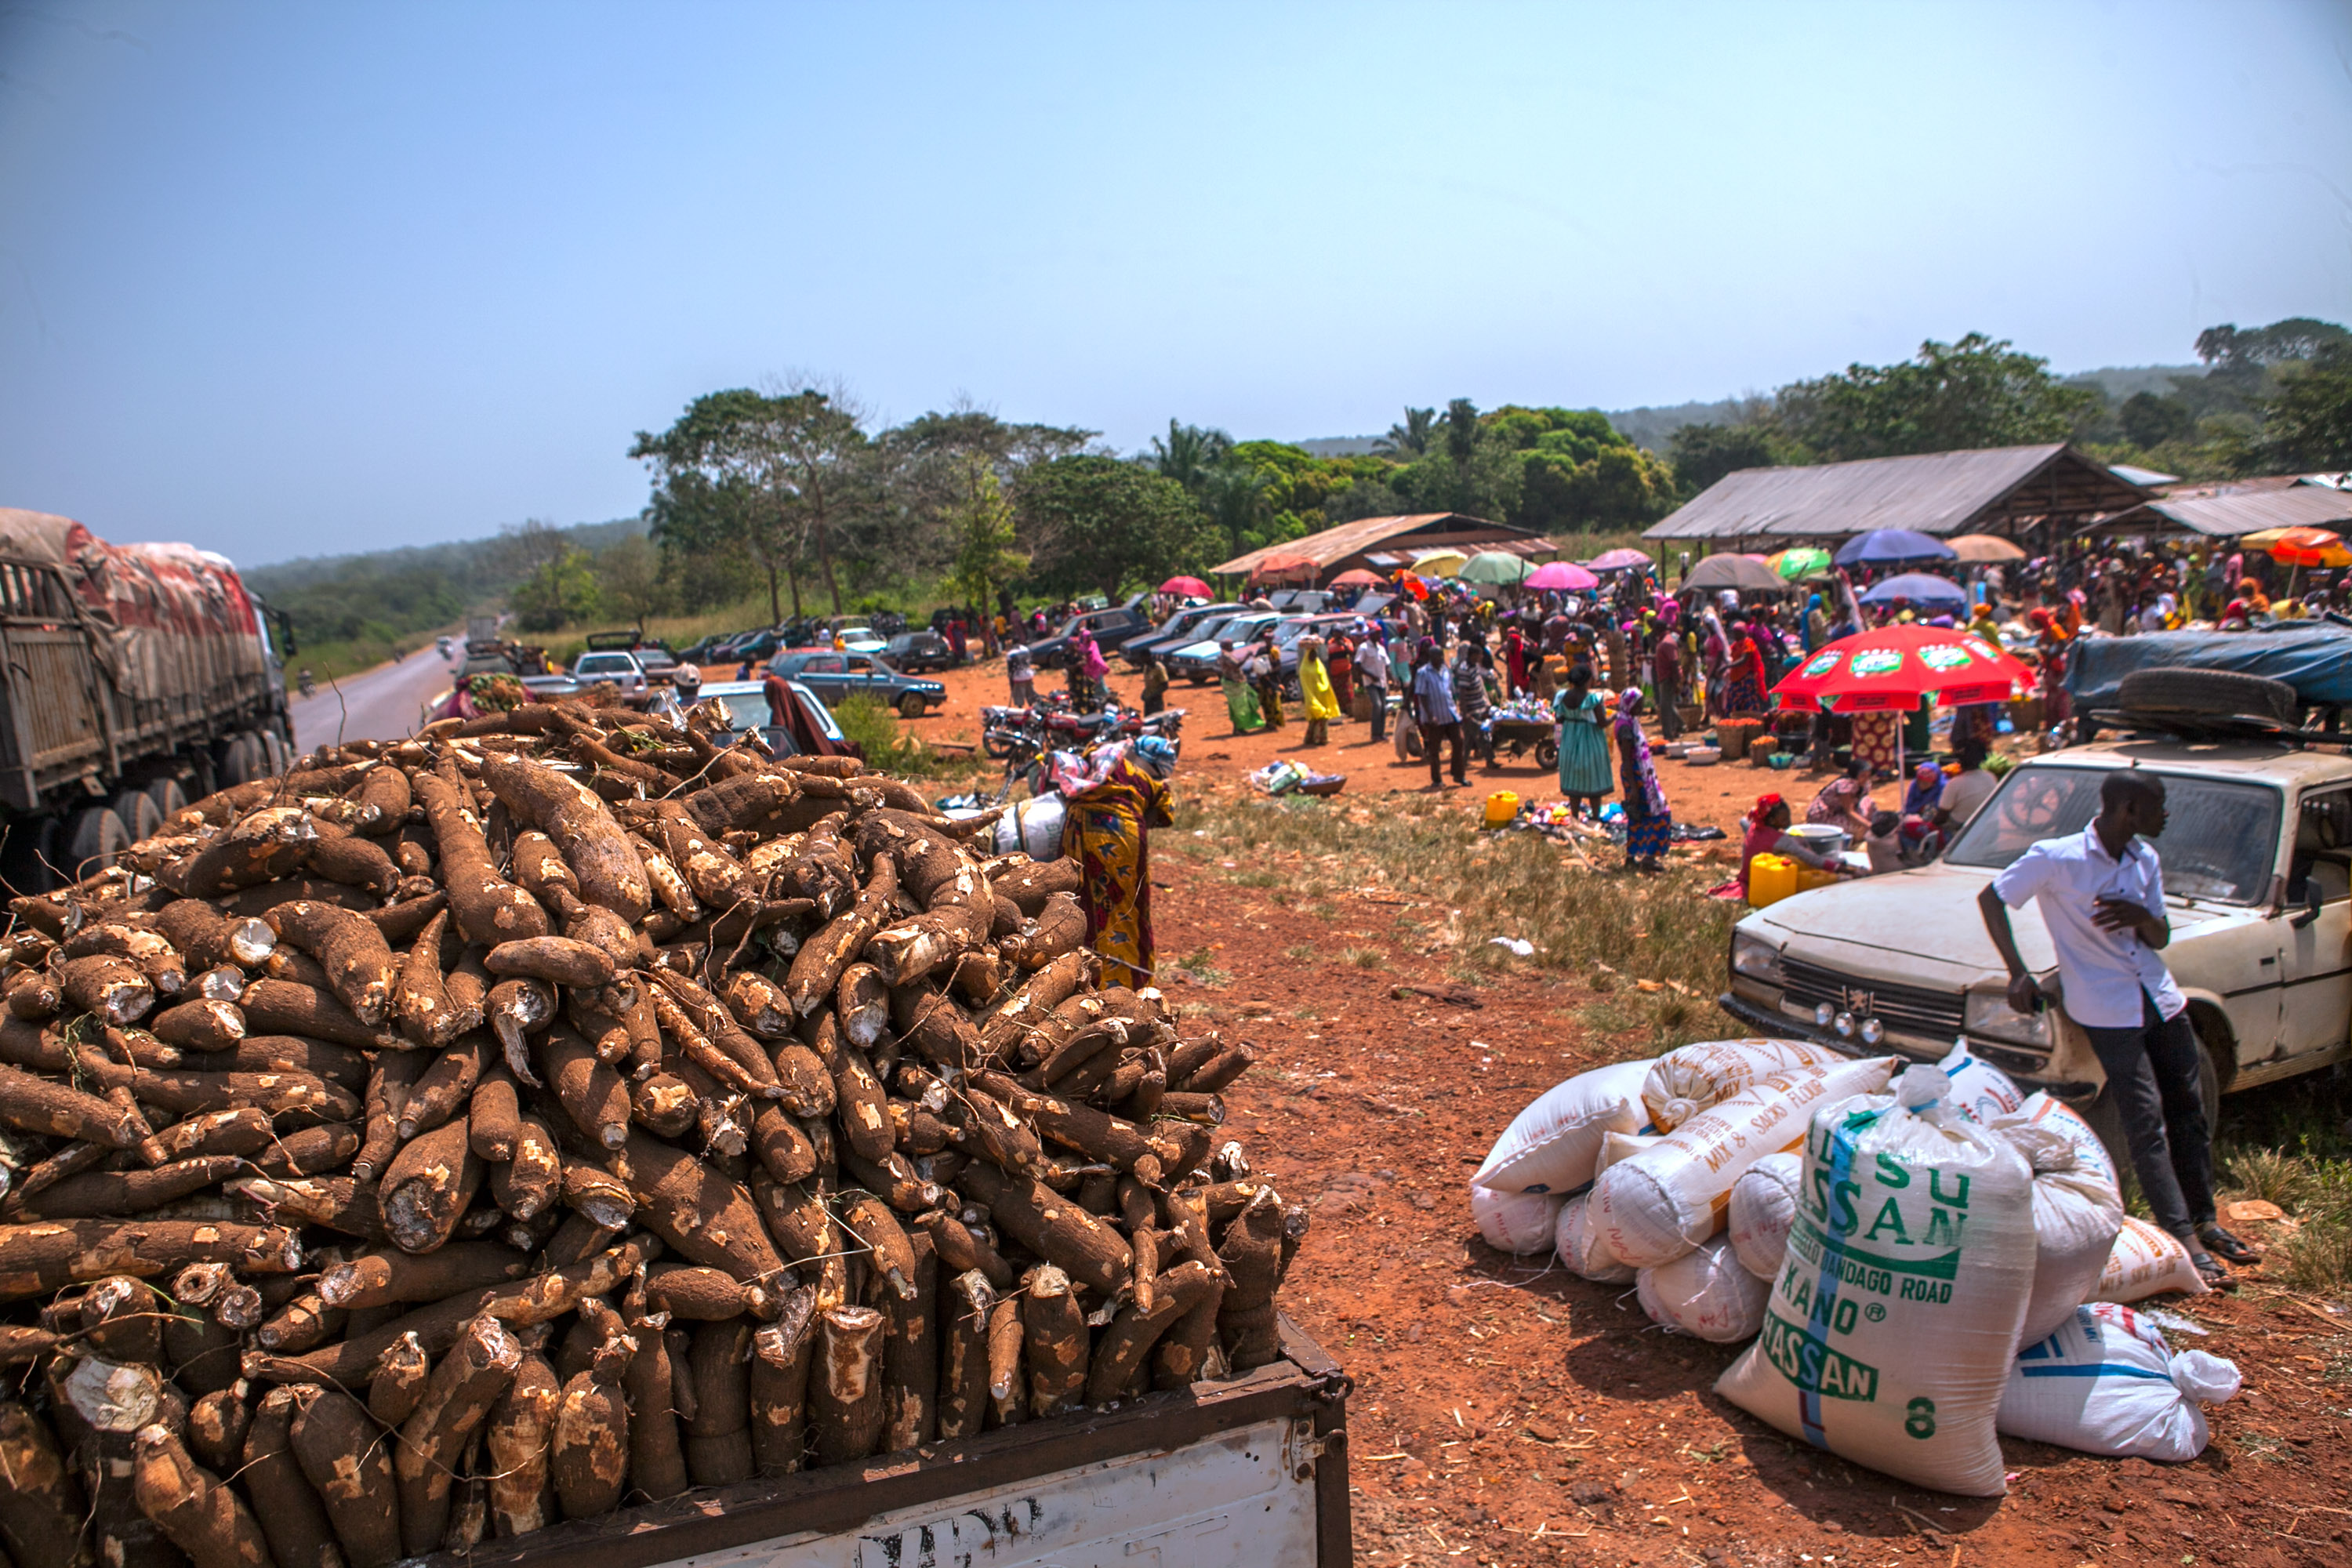 Newly harvested cassava tubers await shipment to processing in Kogi state.